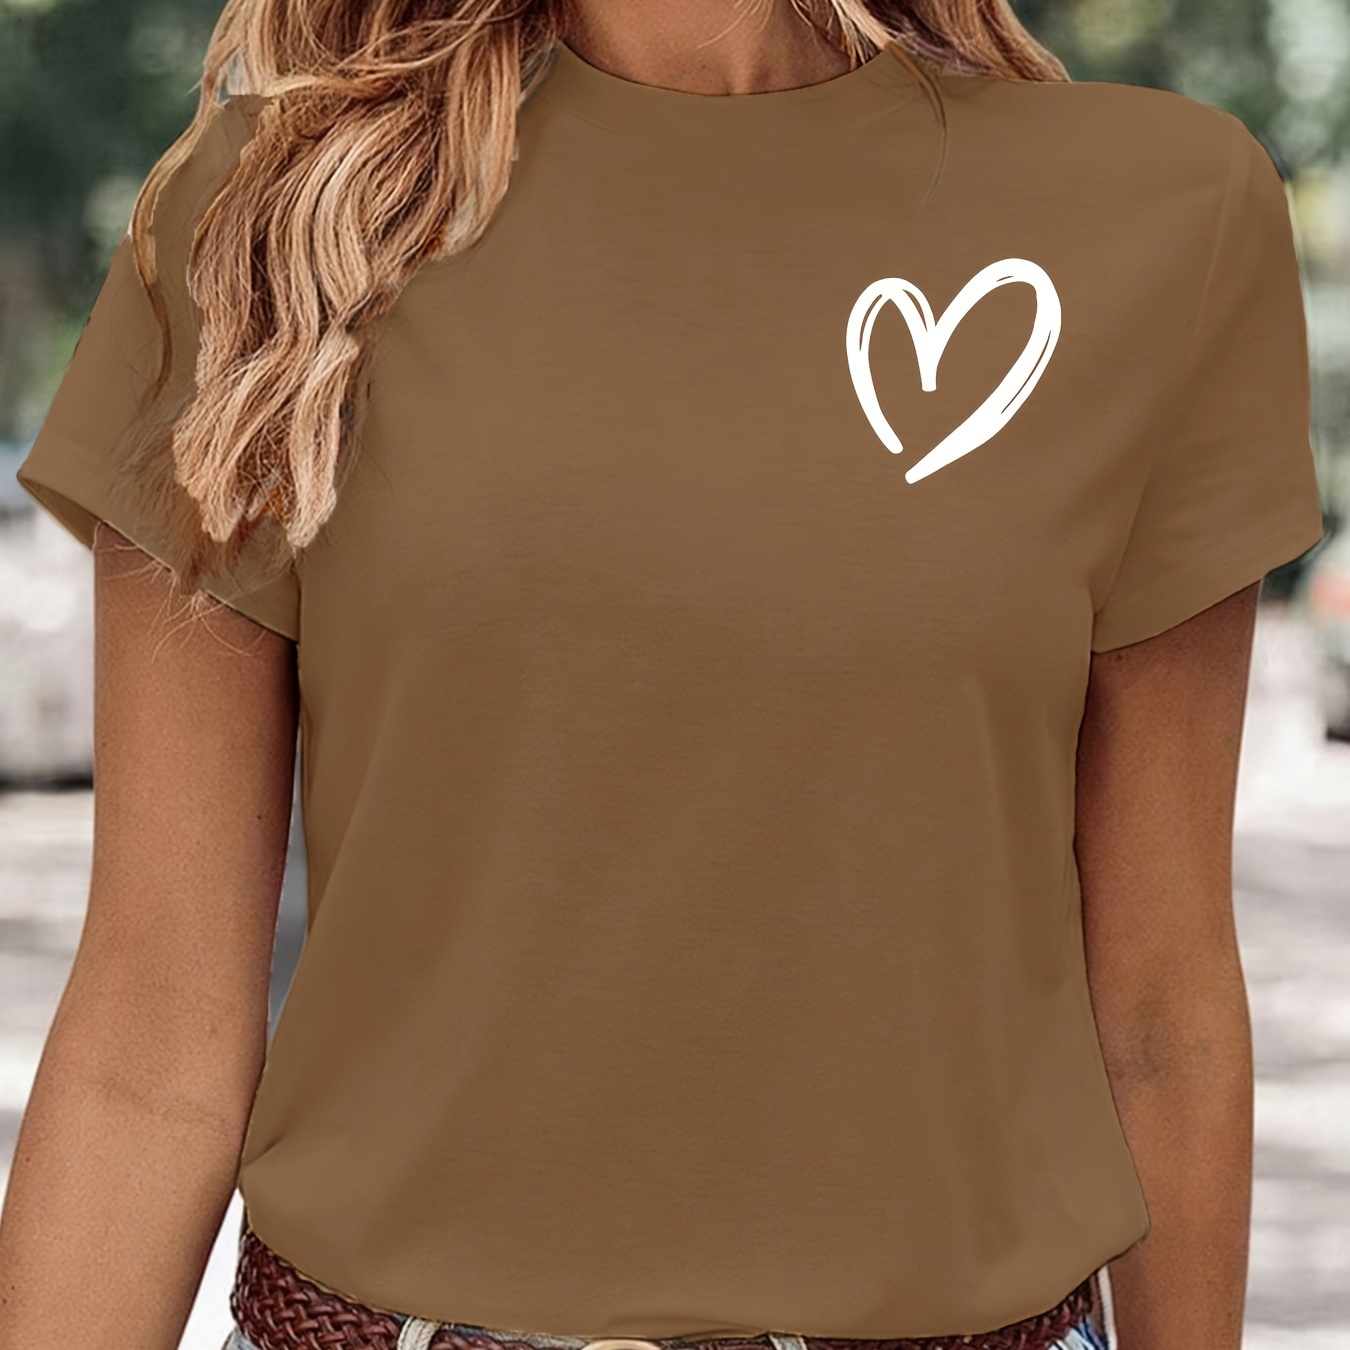 

Heart Pattern Versatile T-shirt, Round Neck Short Sleeves Stretchy Casual Tee, Valentine's Day Women's Tops Graphic